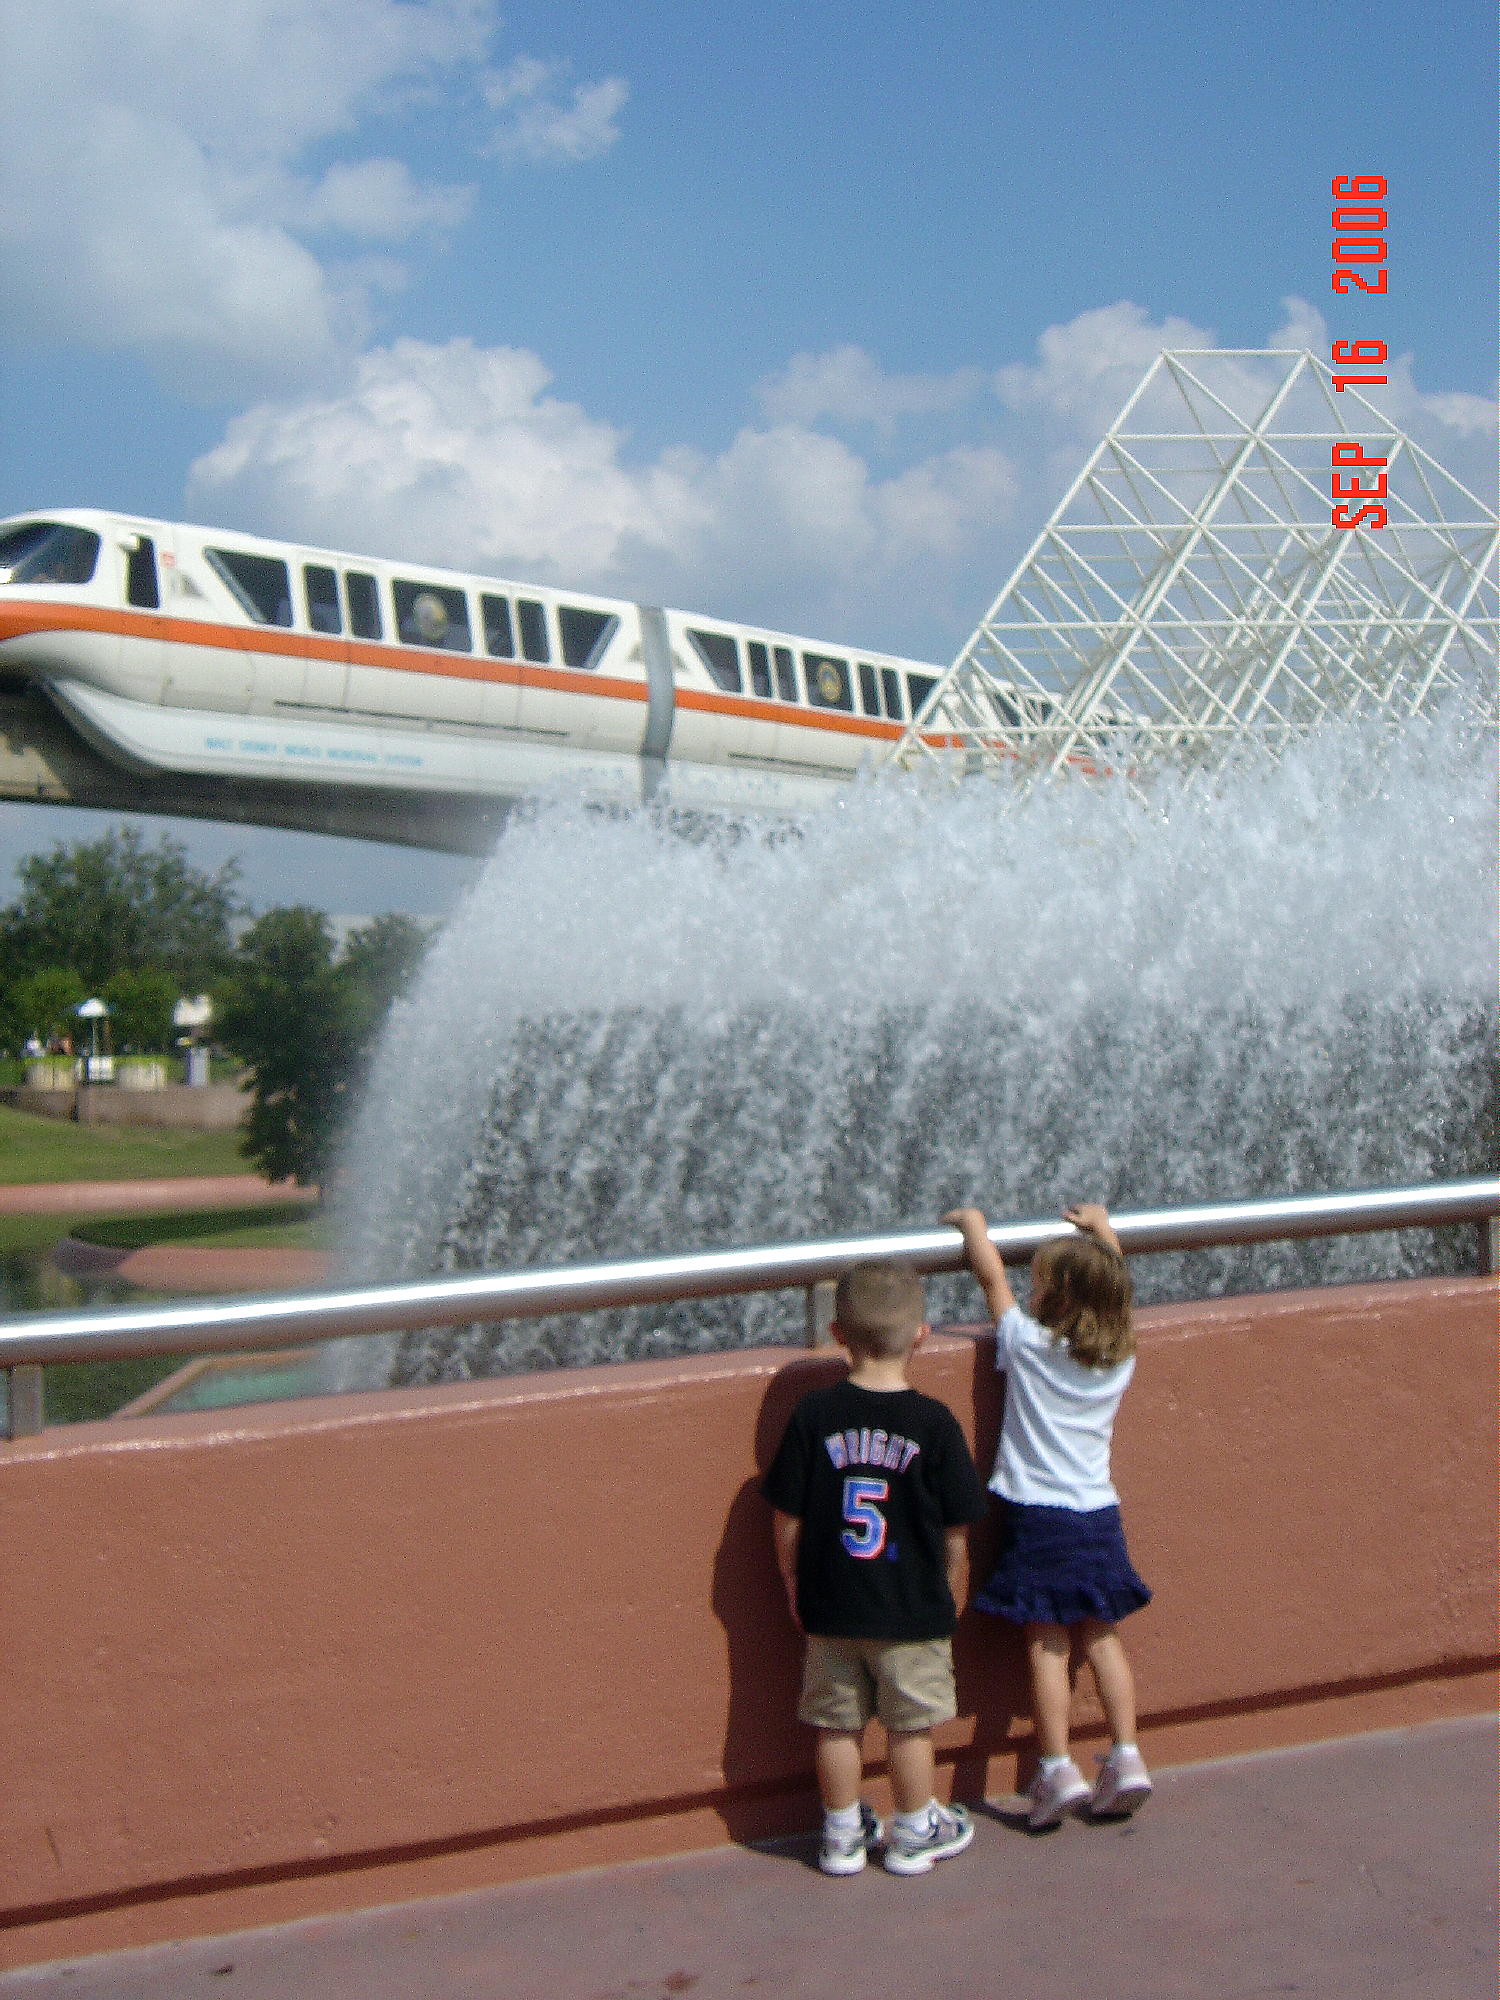 Monorail and Imagination Fountains